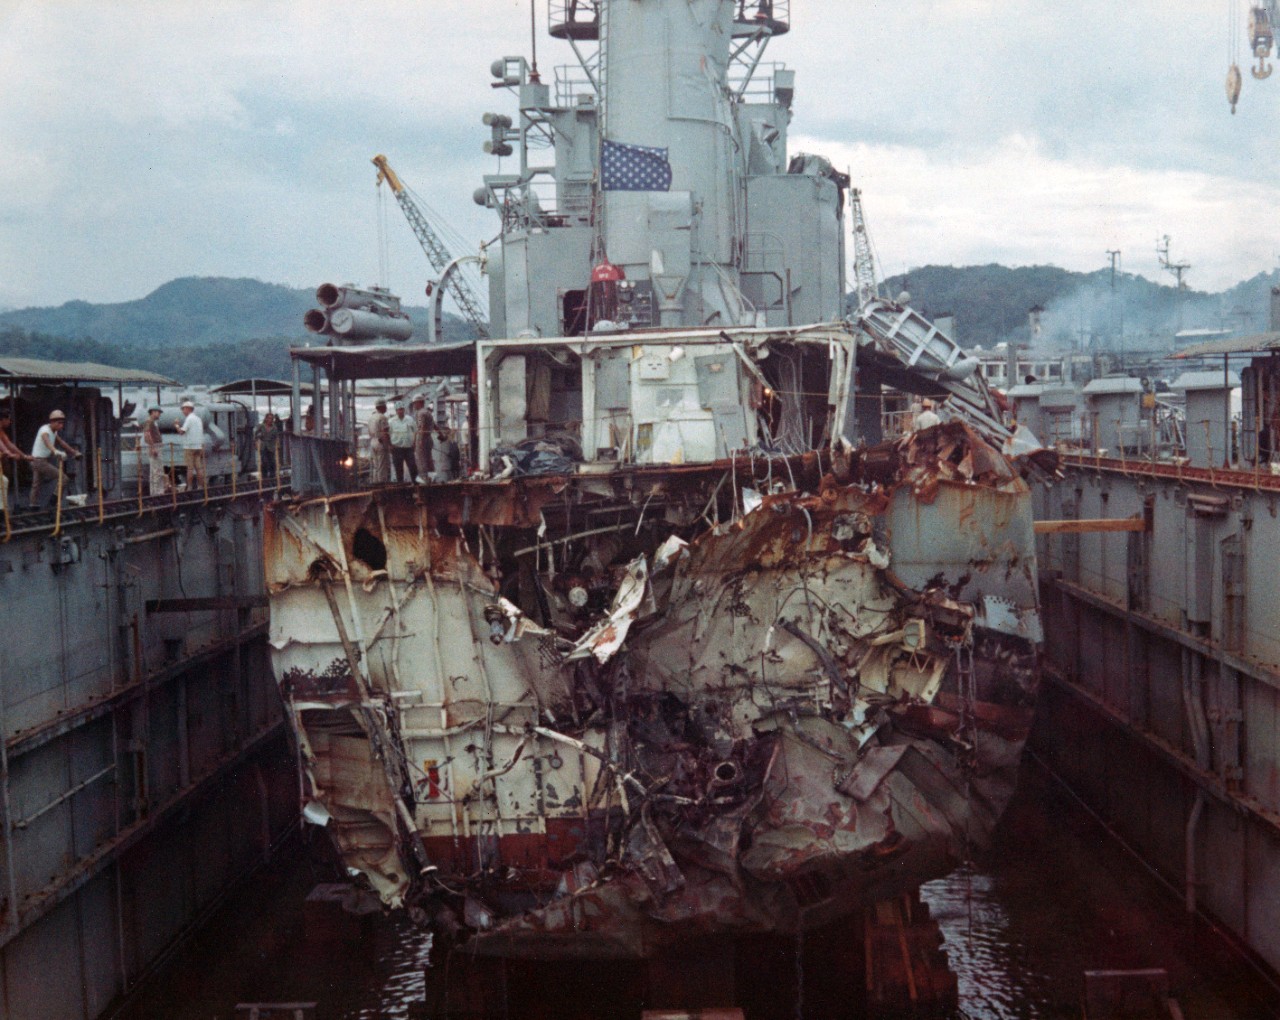 Frank E. Evans’ stern section rests in Windsor at Subic Bay, 9 June 1969. (Naval History and Heritage Command Photograph KN-17907)